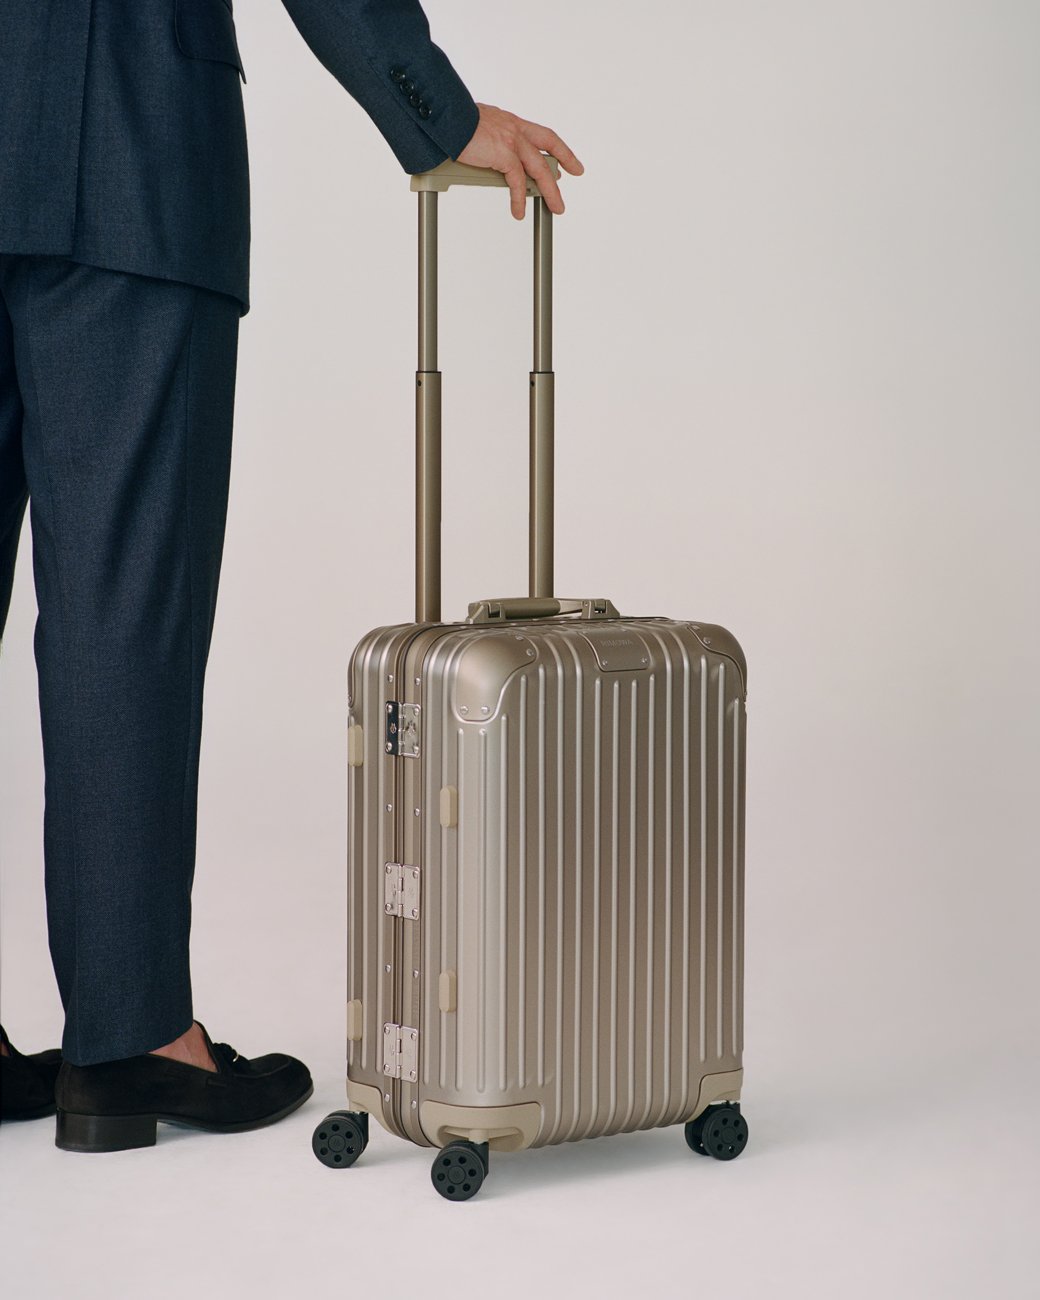 A professional woman in a suit holding a metallic Atria branded gold rolling suitcase with wheels on a white backdrop